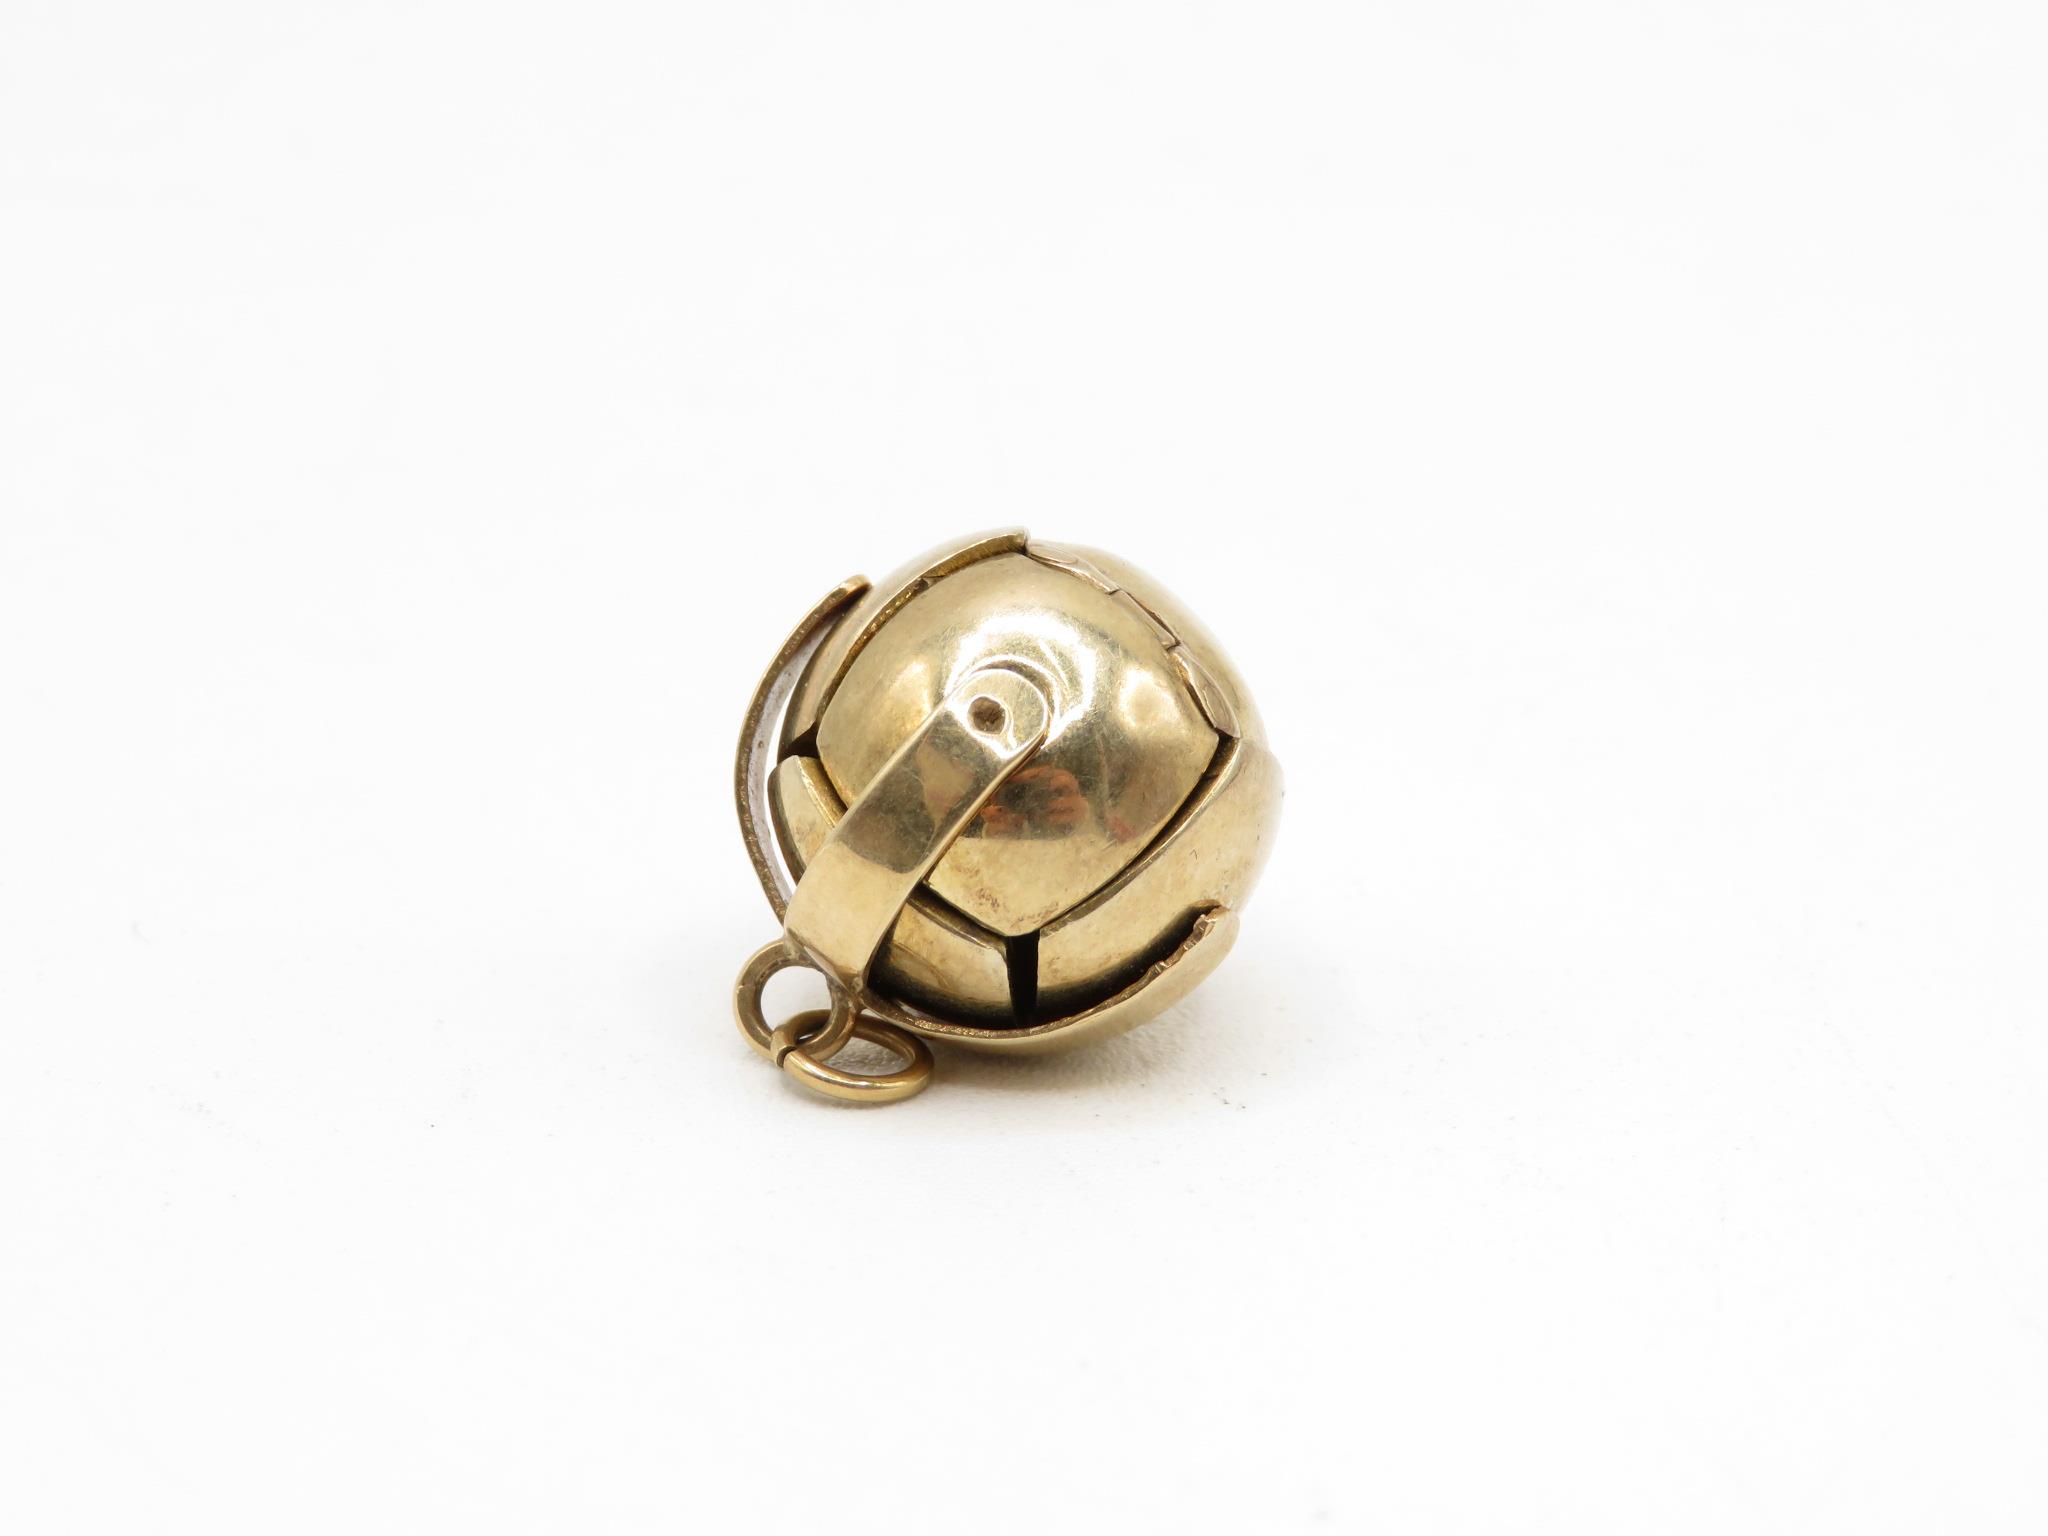 9ct gold on silver Masonic puzzle ball 7.9g 16.5mm dia.